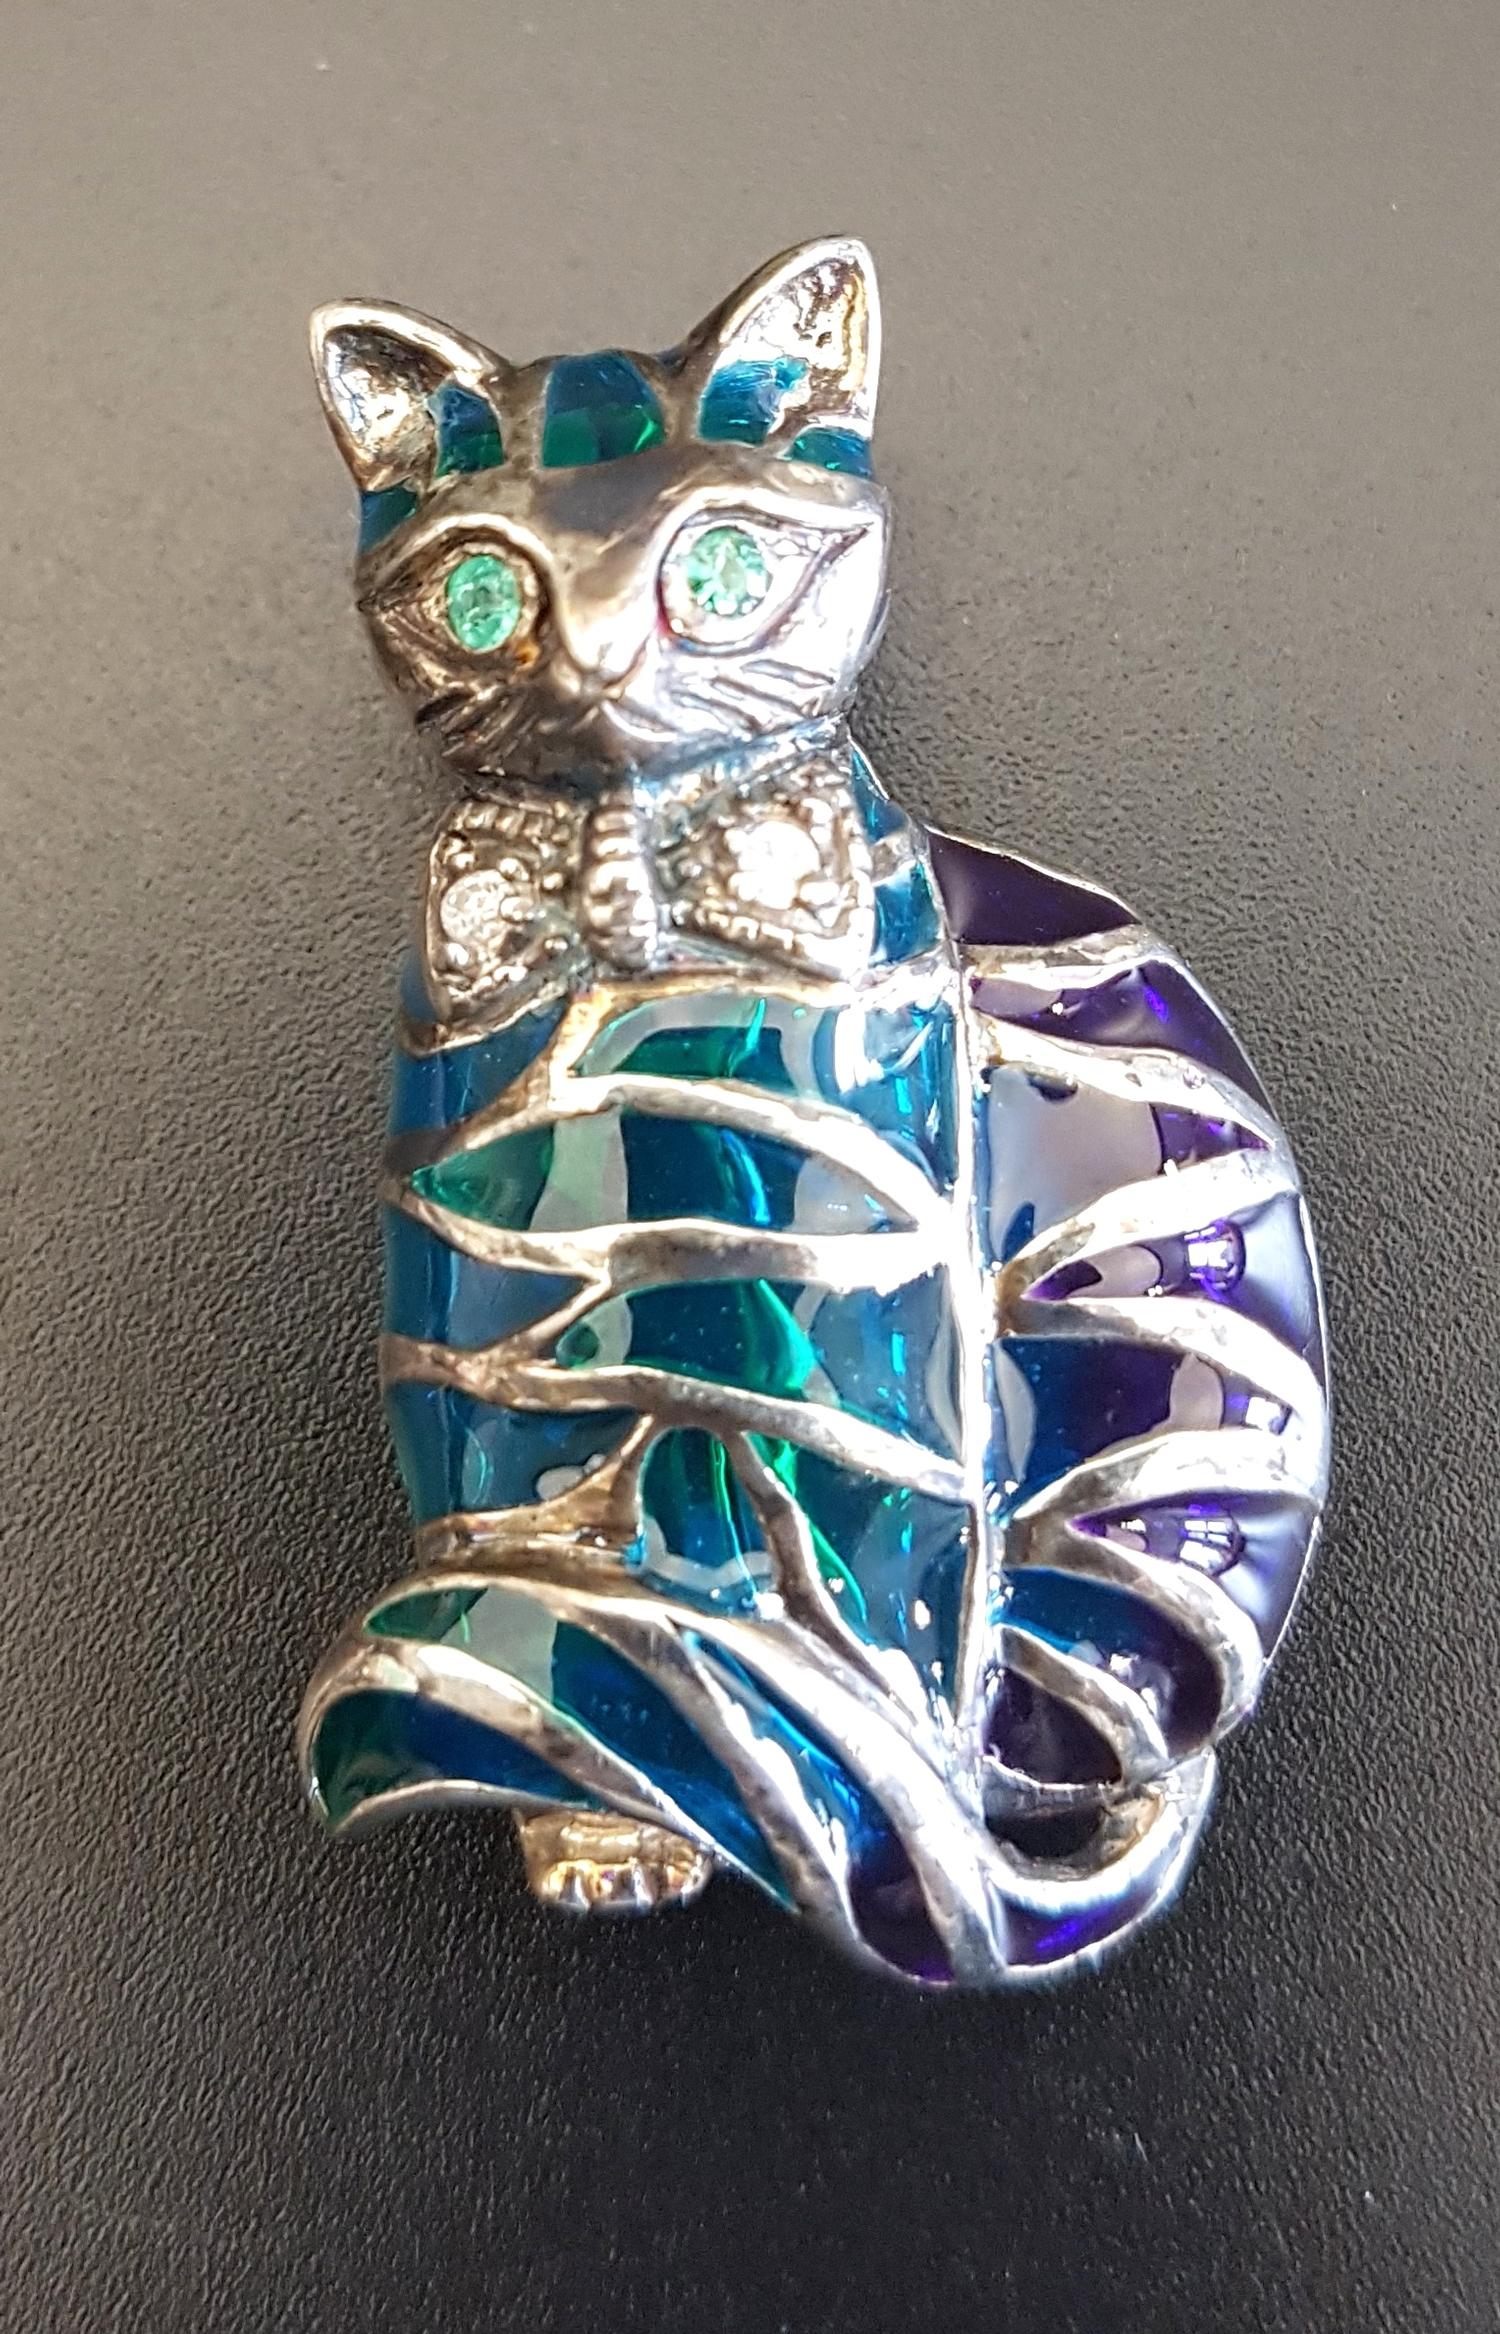 DIAMOND AND EMERALD SET CAT BROOCH with colourful filled panels to the body, with emerald eyes and